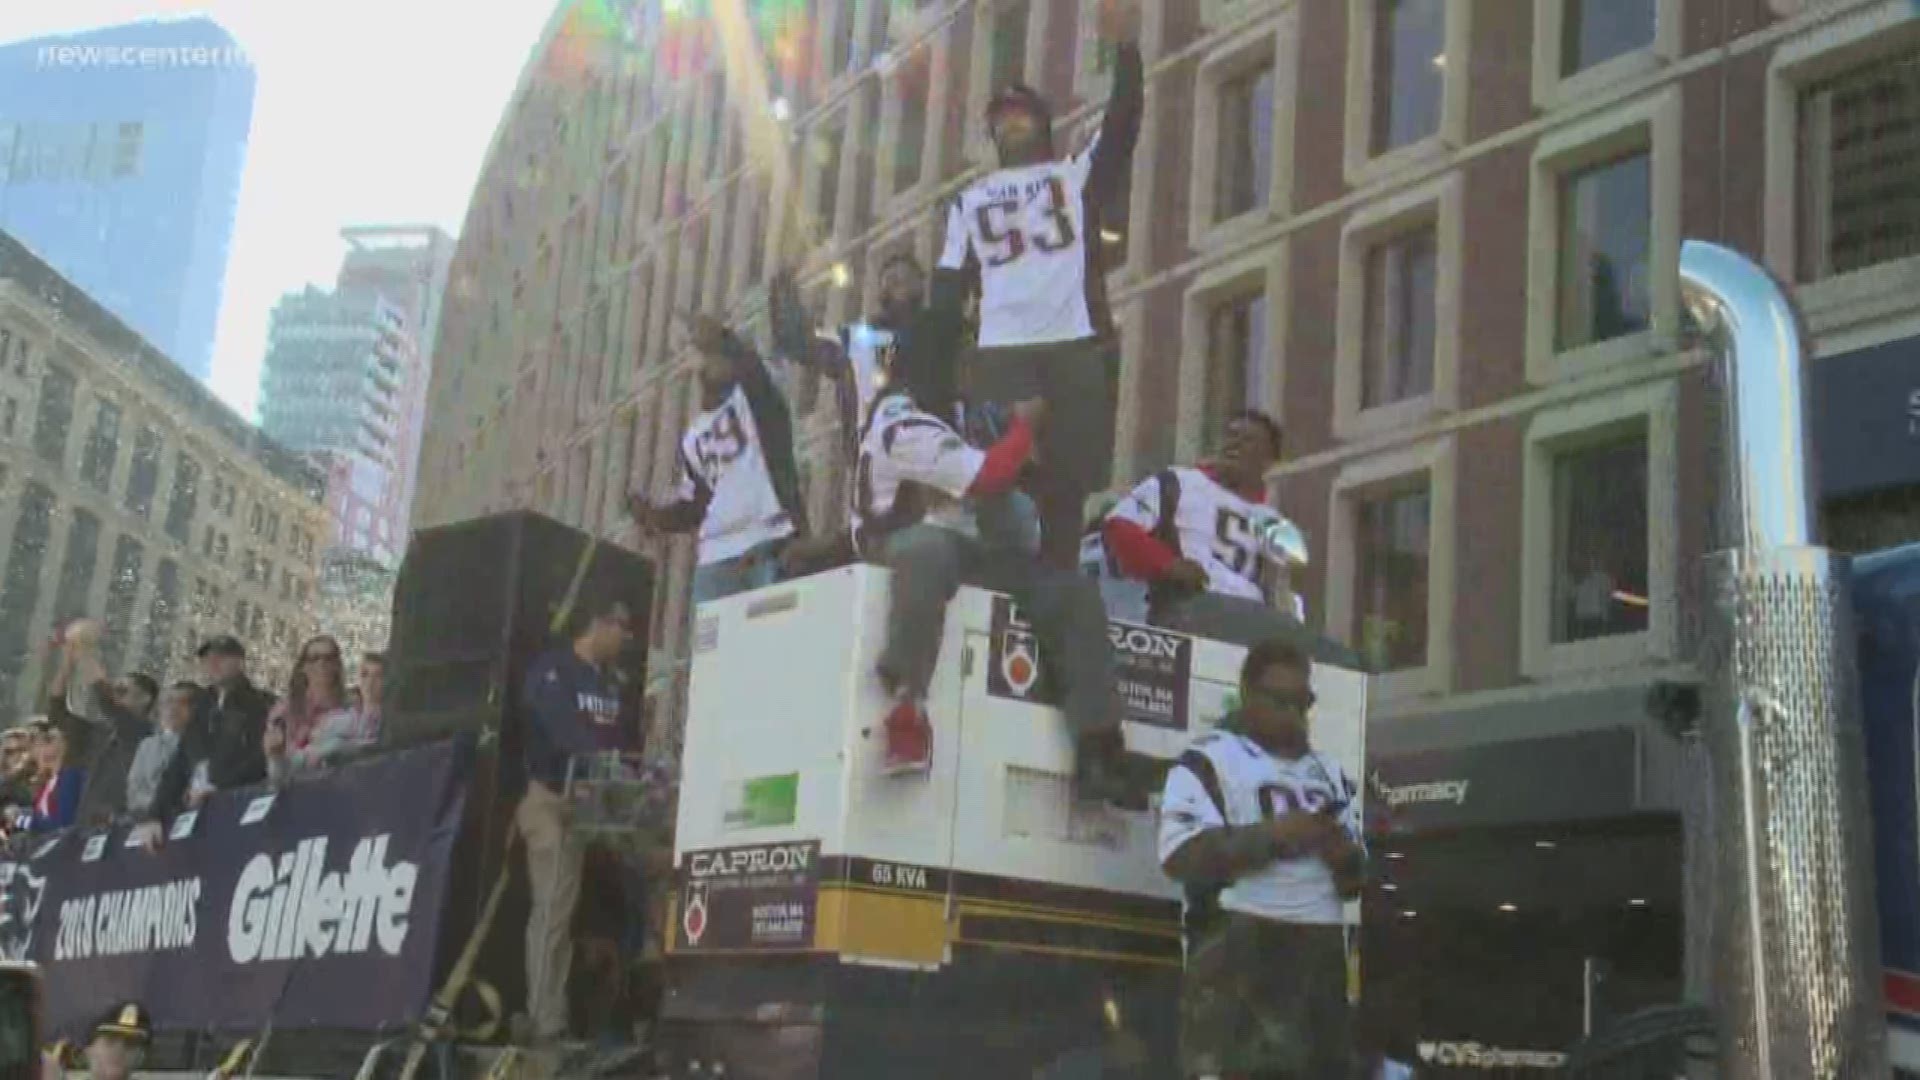 Hundreds of thousands of proud Patriots fans celebrated the team's sixth Super Bowl win in Boston at the parade Tuesday morning.